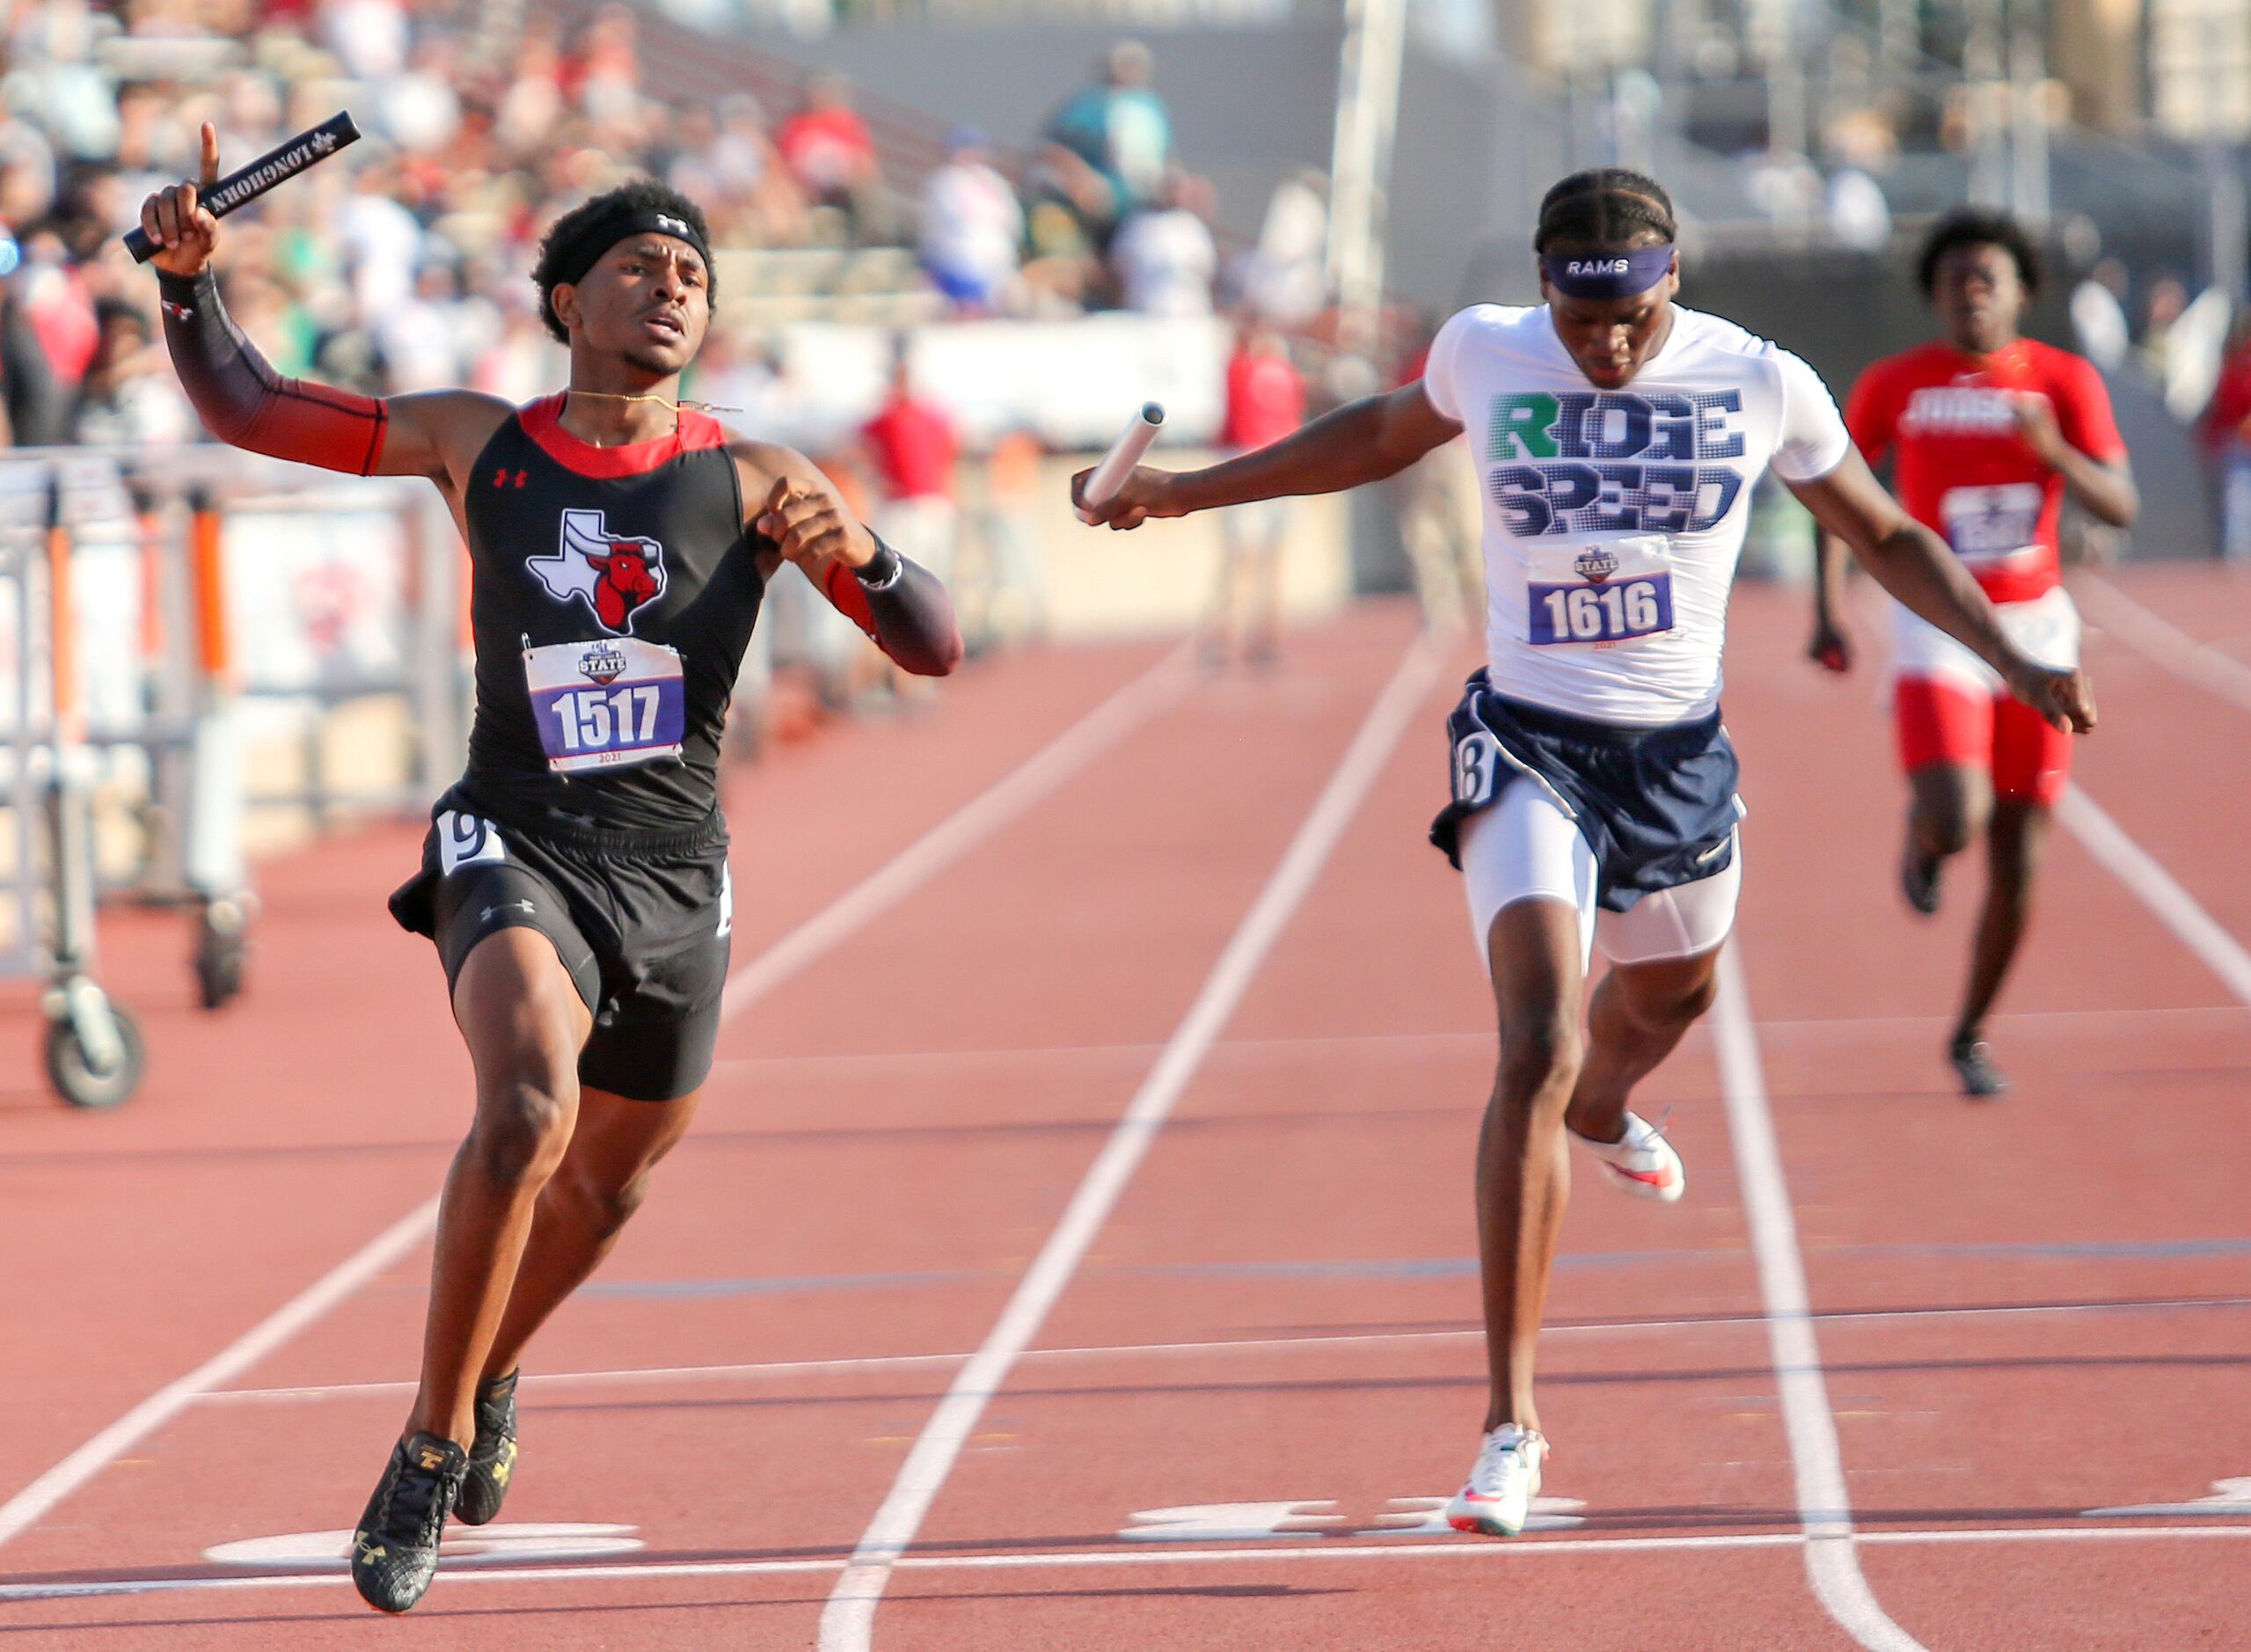 Diallo Good of Cedar Hill crosses the finish line in first place in the 6A Boys 4x200 meter...